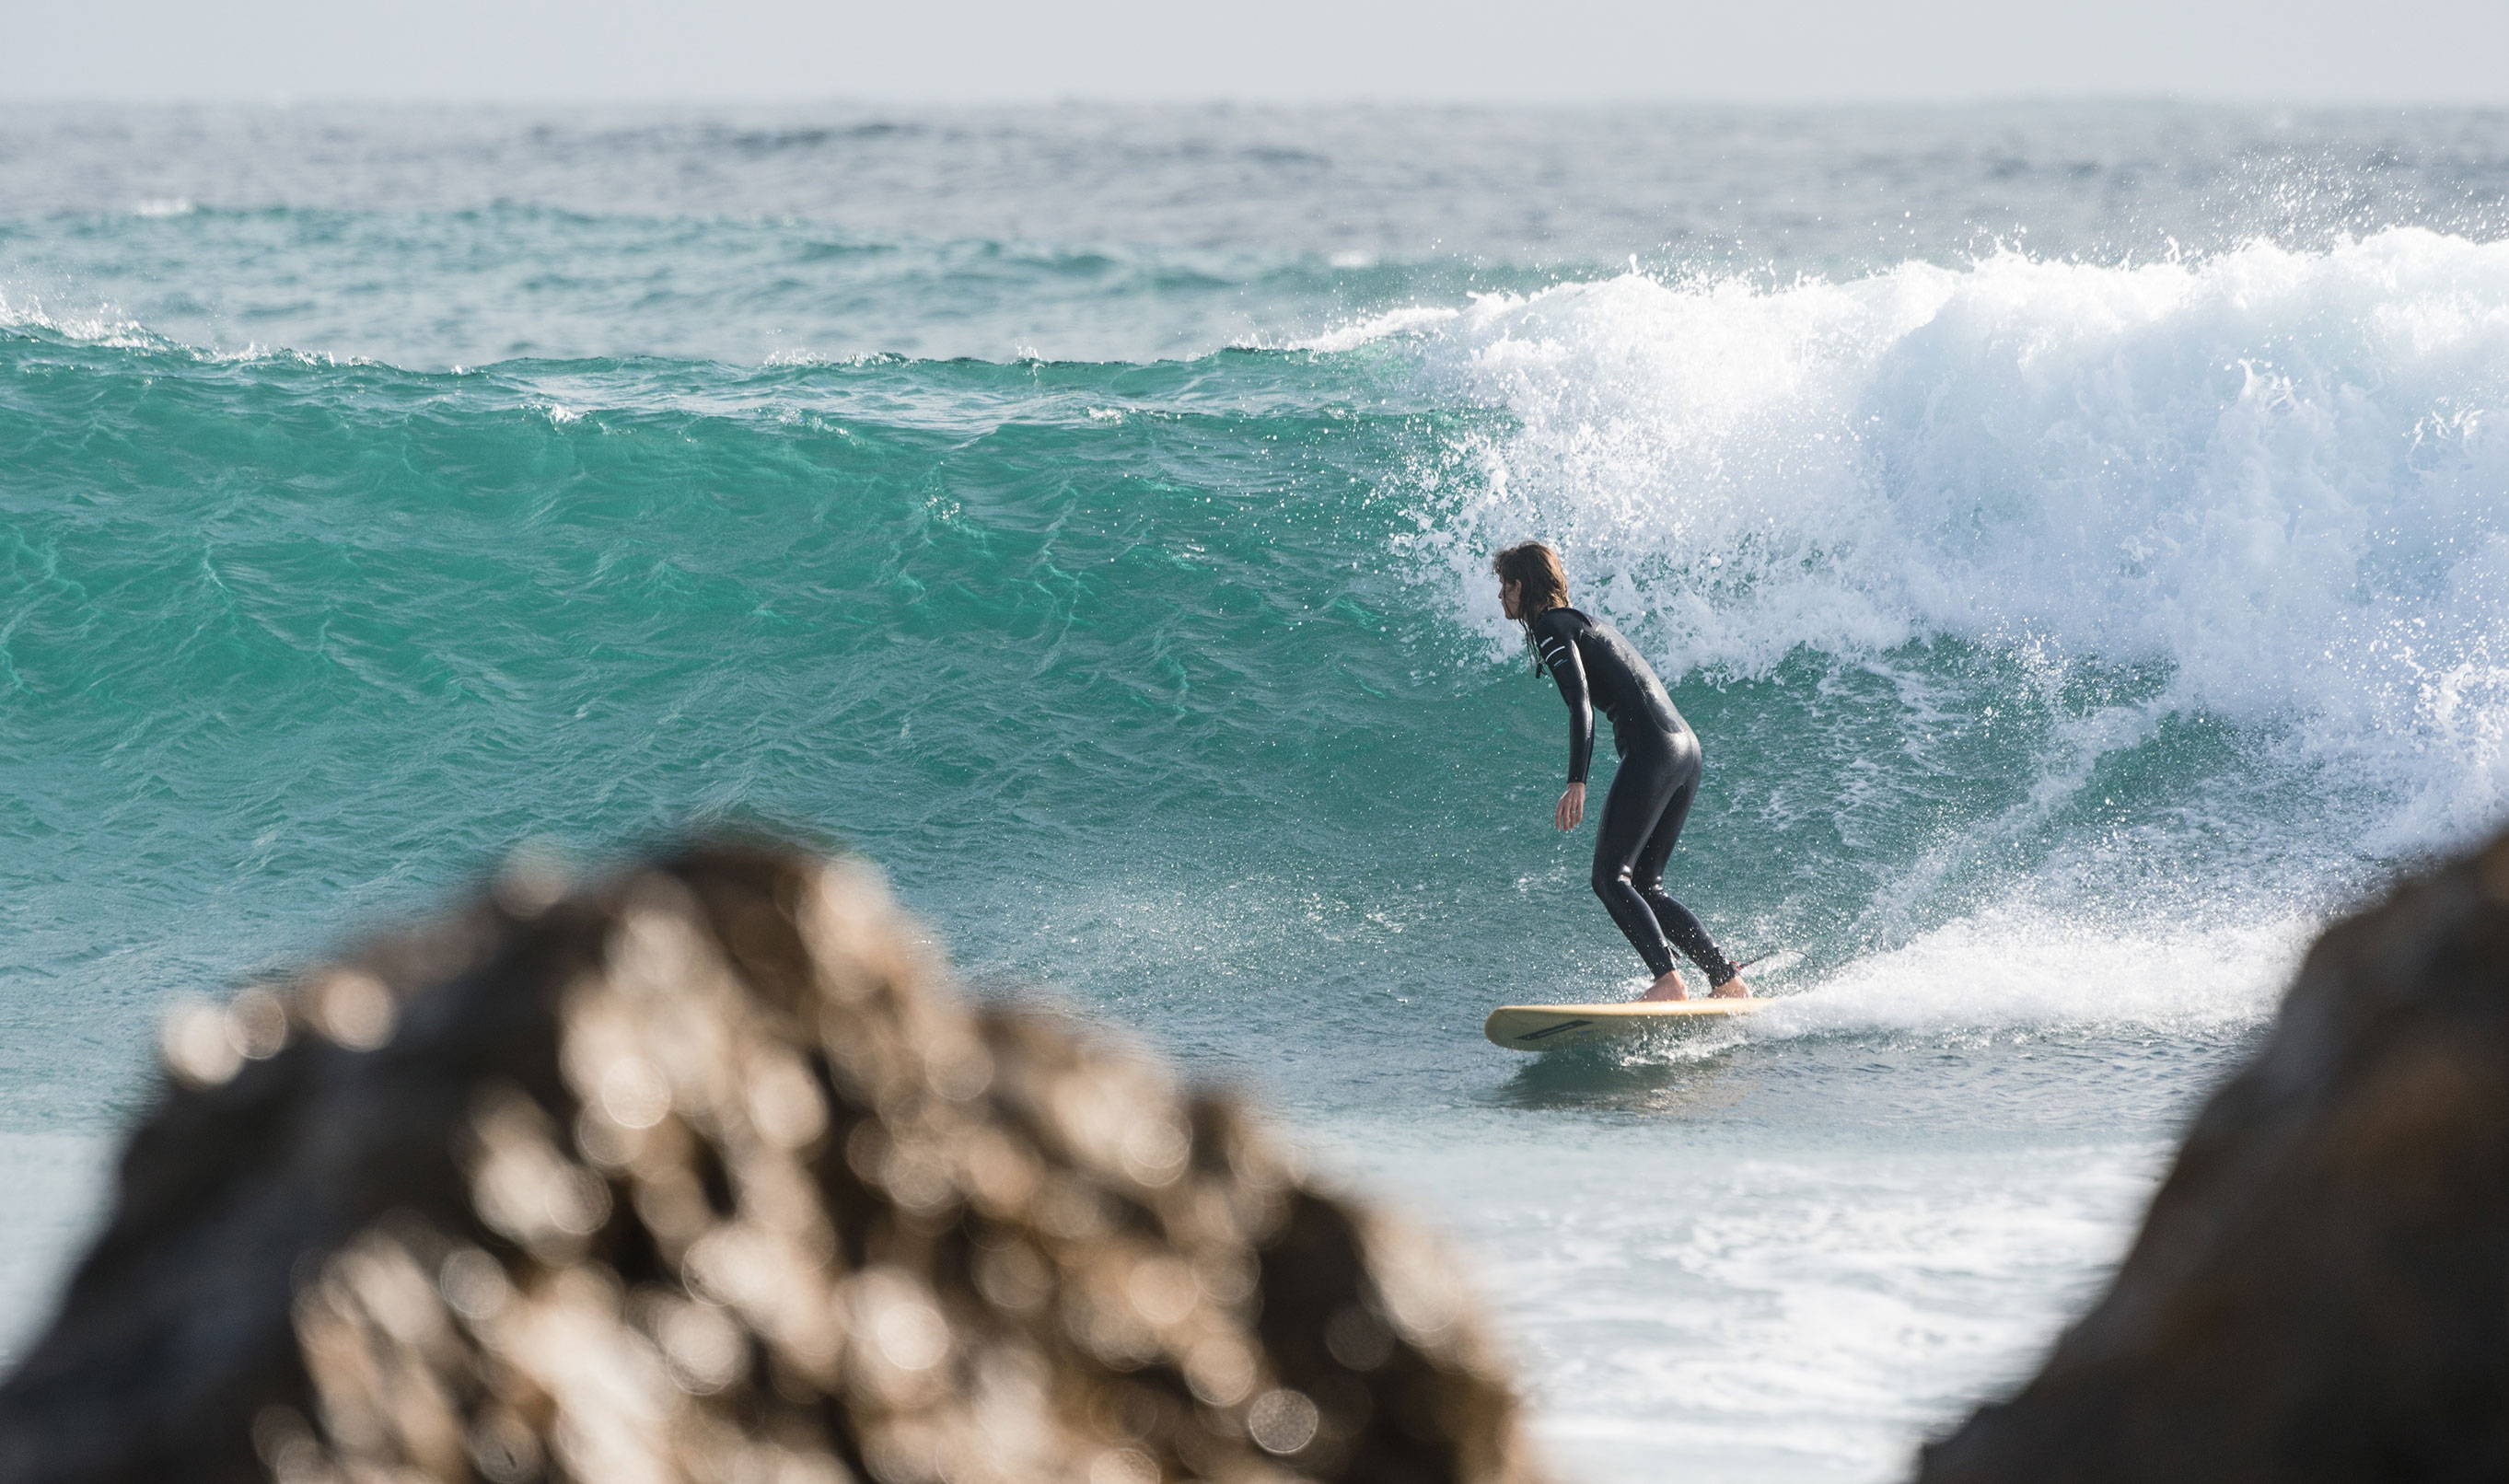 Sally McGee surfing in a Finisterre wetsuit